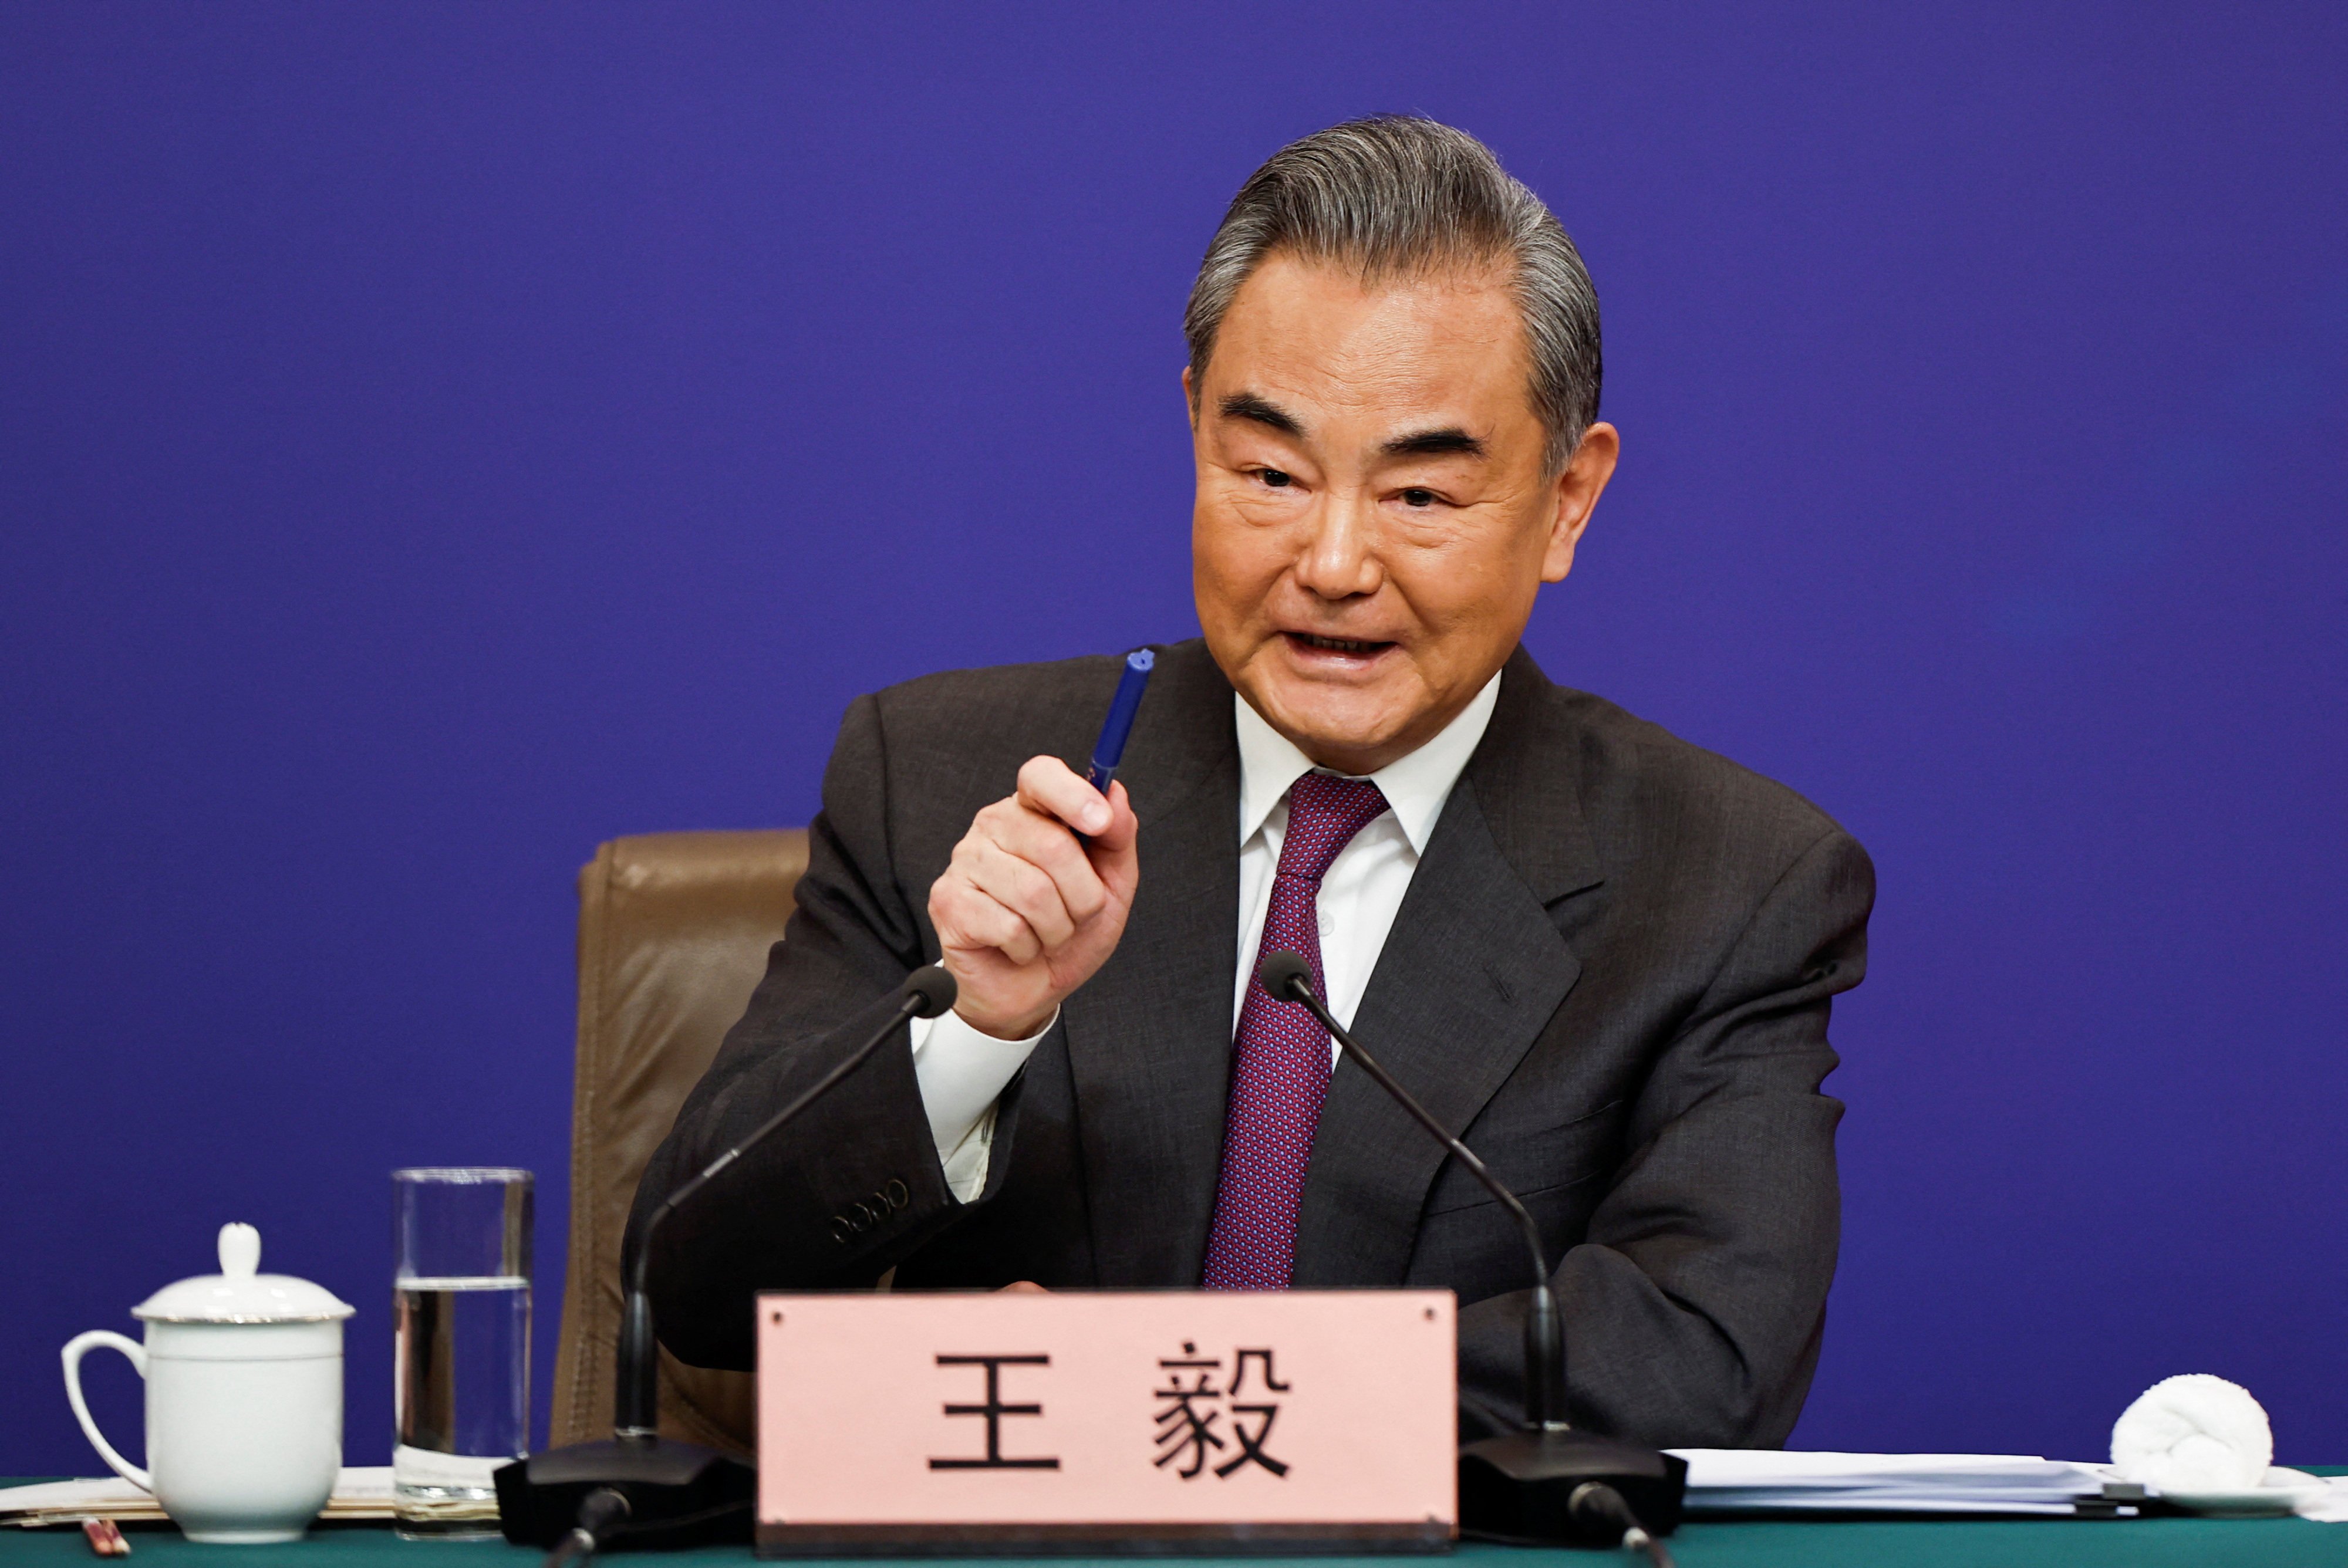 The Chinese foreign minister took on negative foreign sentiment about China’s economy during a press conference on the sidelines of the “two sessions” in Beijing. Photo: Reuters